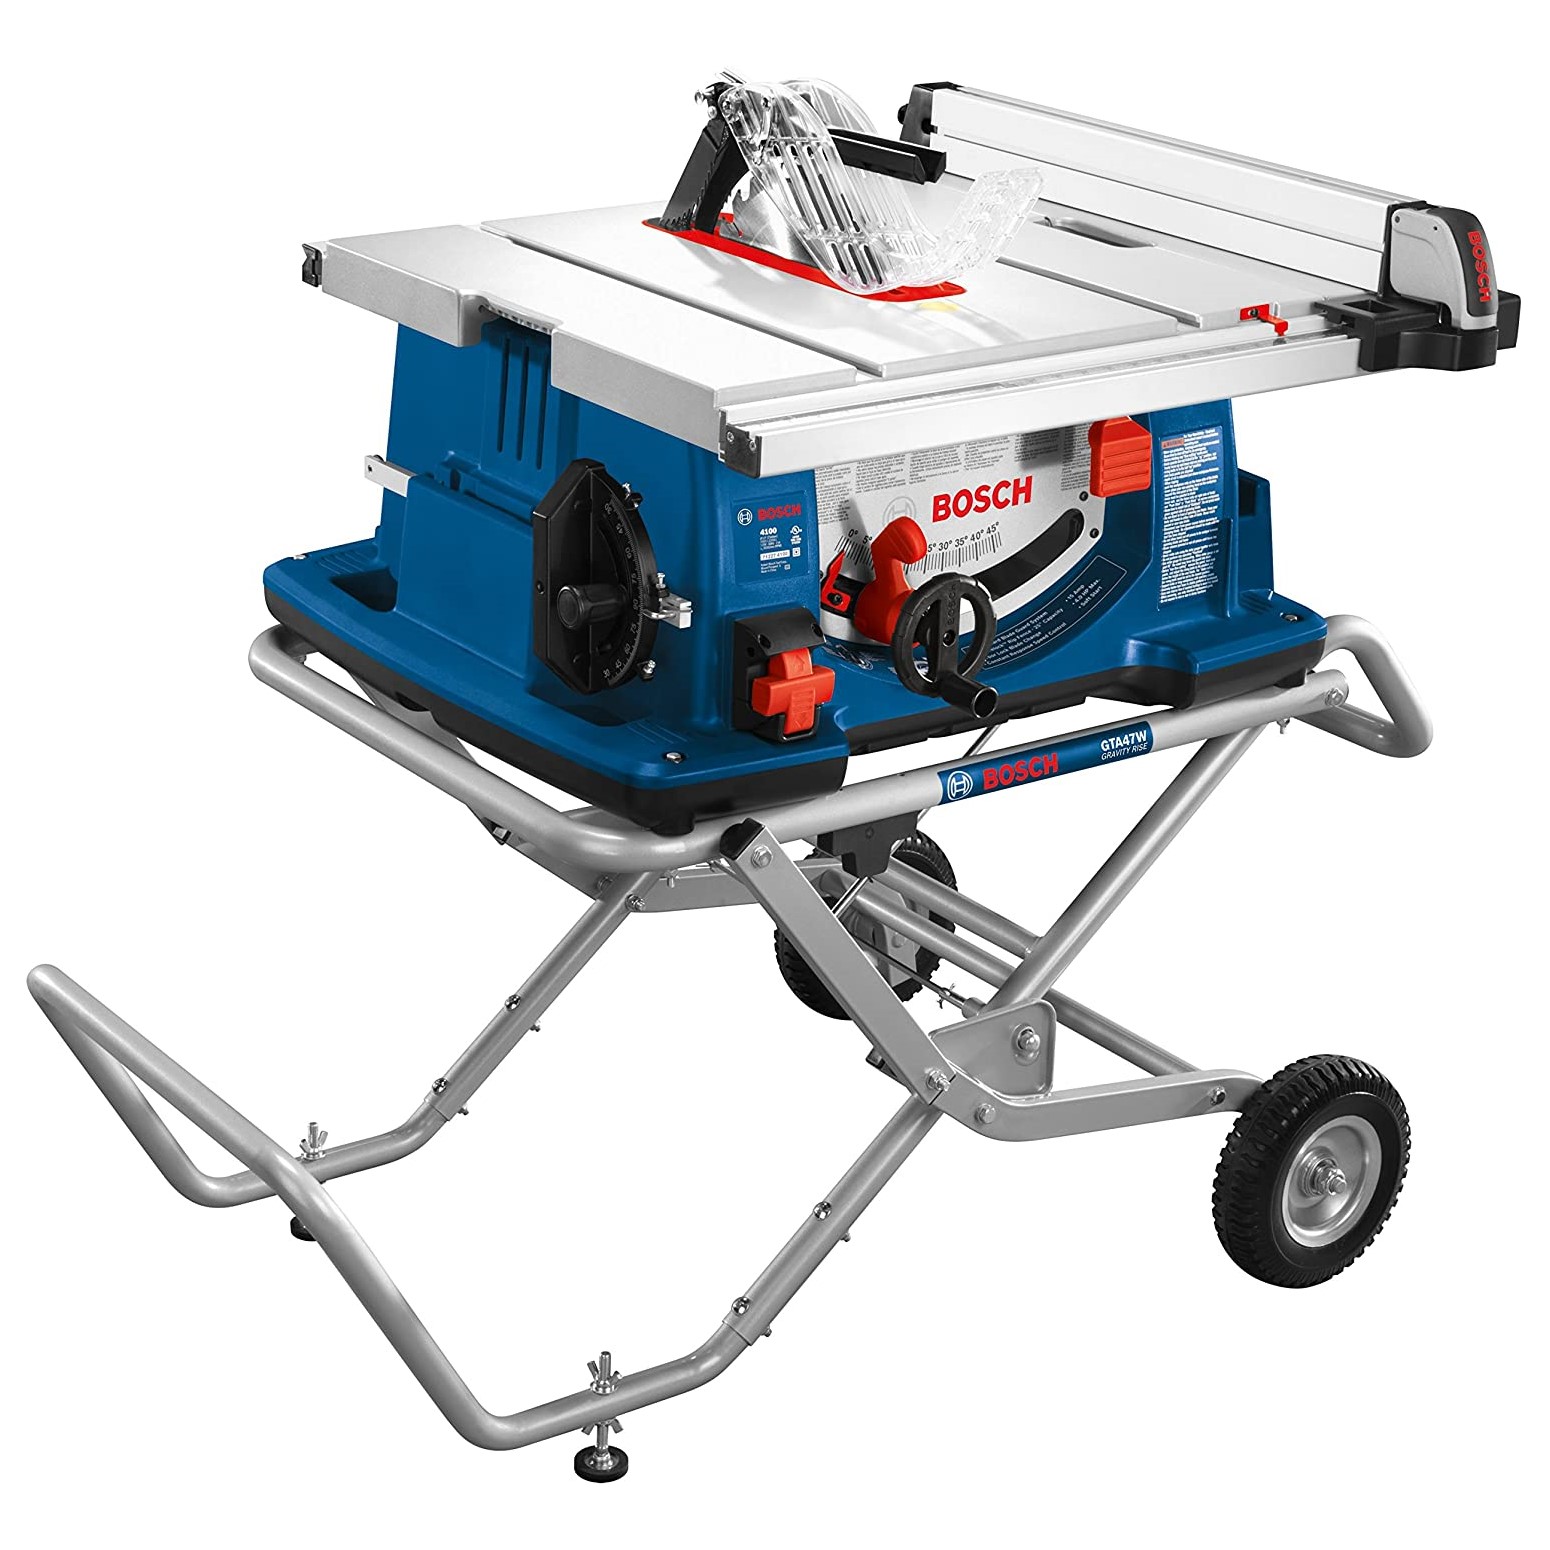 Bosch Power Tools 4100-10 Tablesaw - 10 Inch Jobsite Table Saw with 25 Inch Cutting Capacity and Portable Folding Table Stand